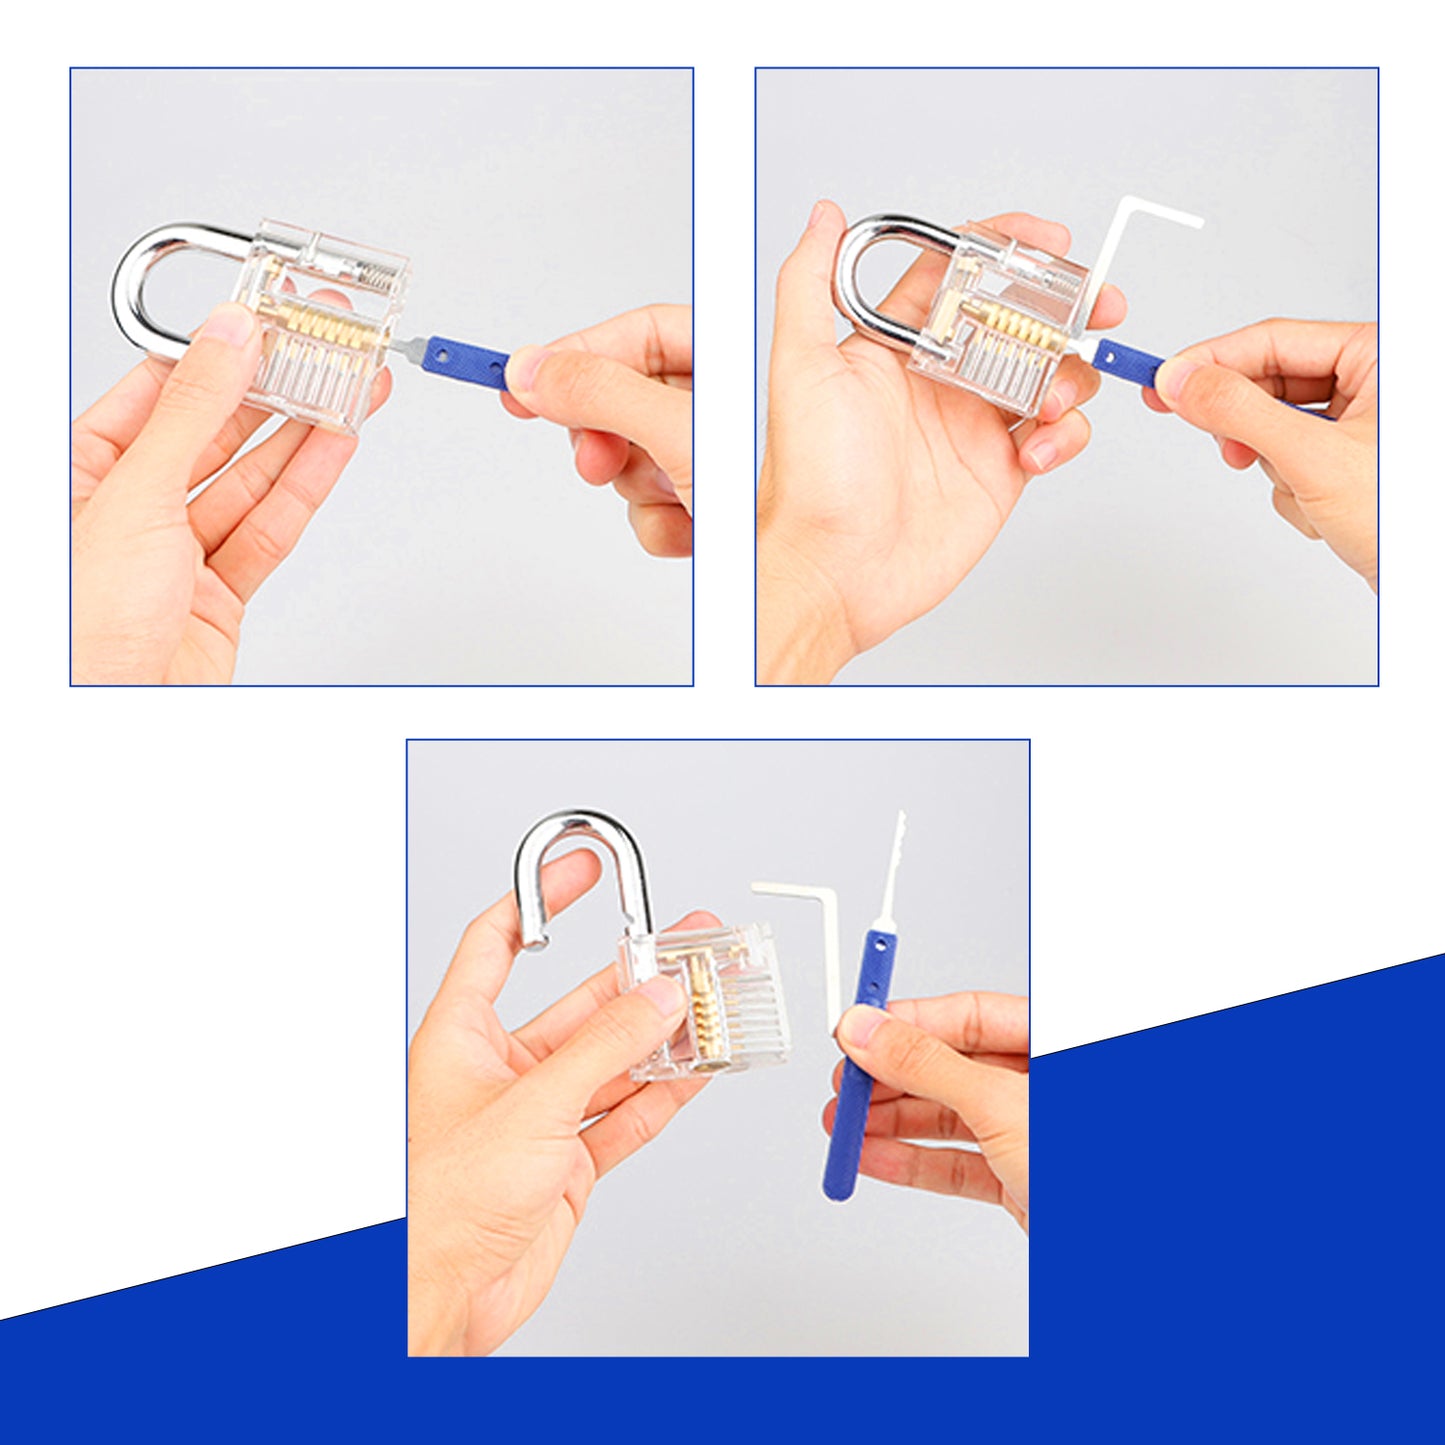 Practice Lock Picking Tools with 4 Transparent Training Padlock, Guide for Beginner and Locksmith Training